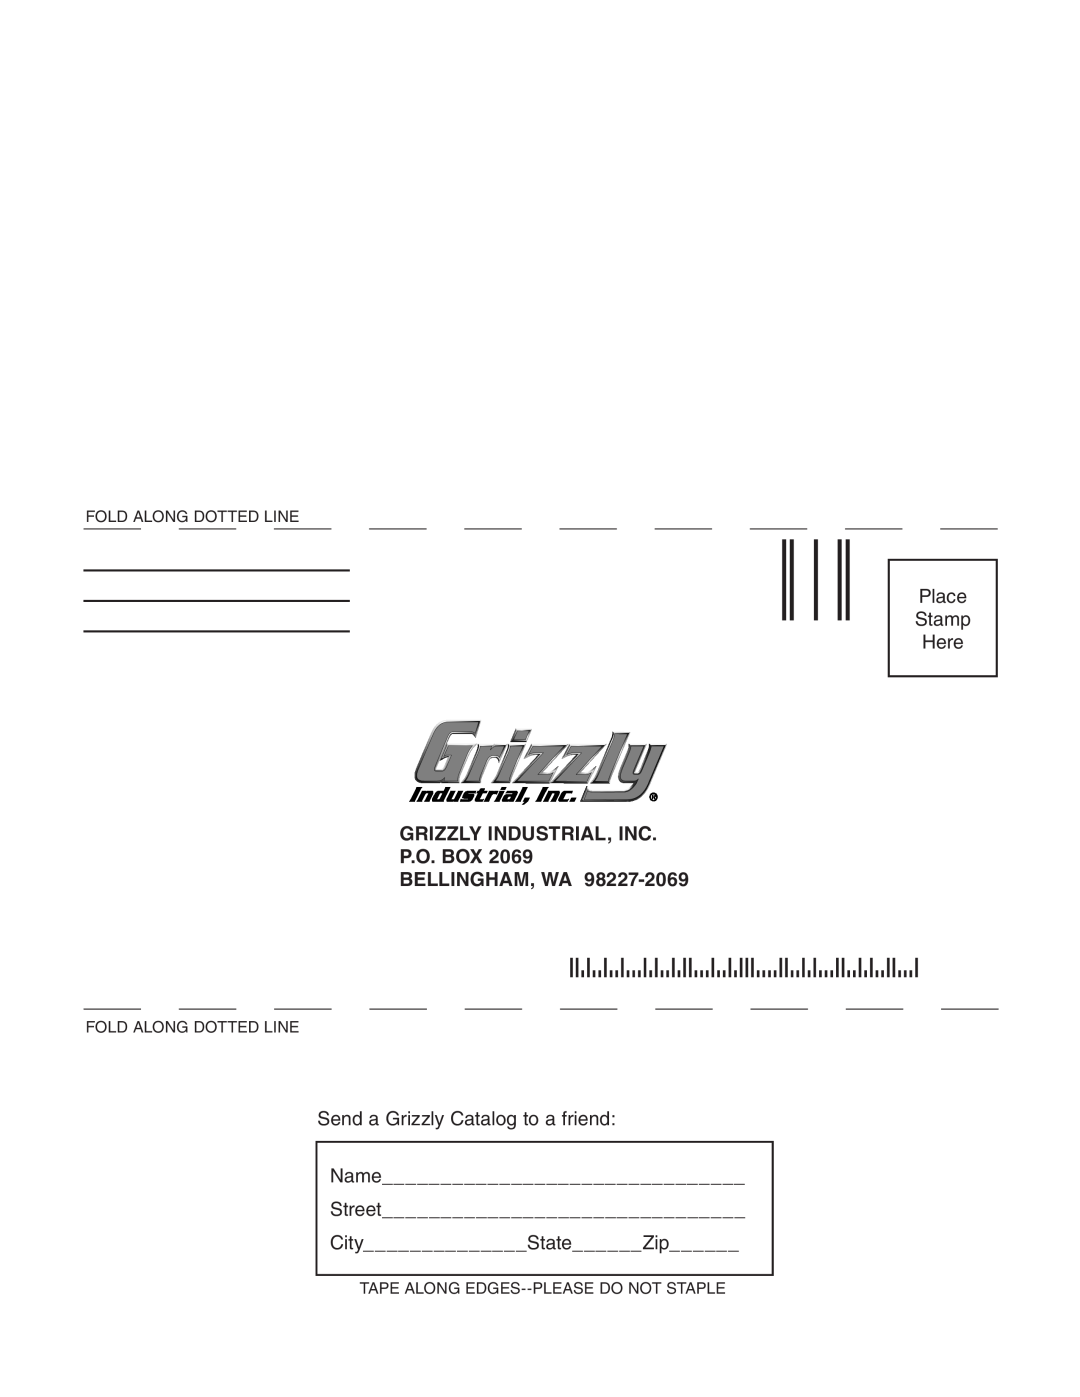 Grizzly G0572 Place Stamp Here, Grizzly Industrial, Inc P.O. Box Bellingham, Wa, Send a Grizzly Catalog to a friend 